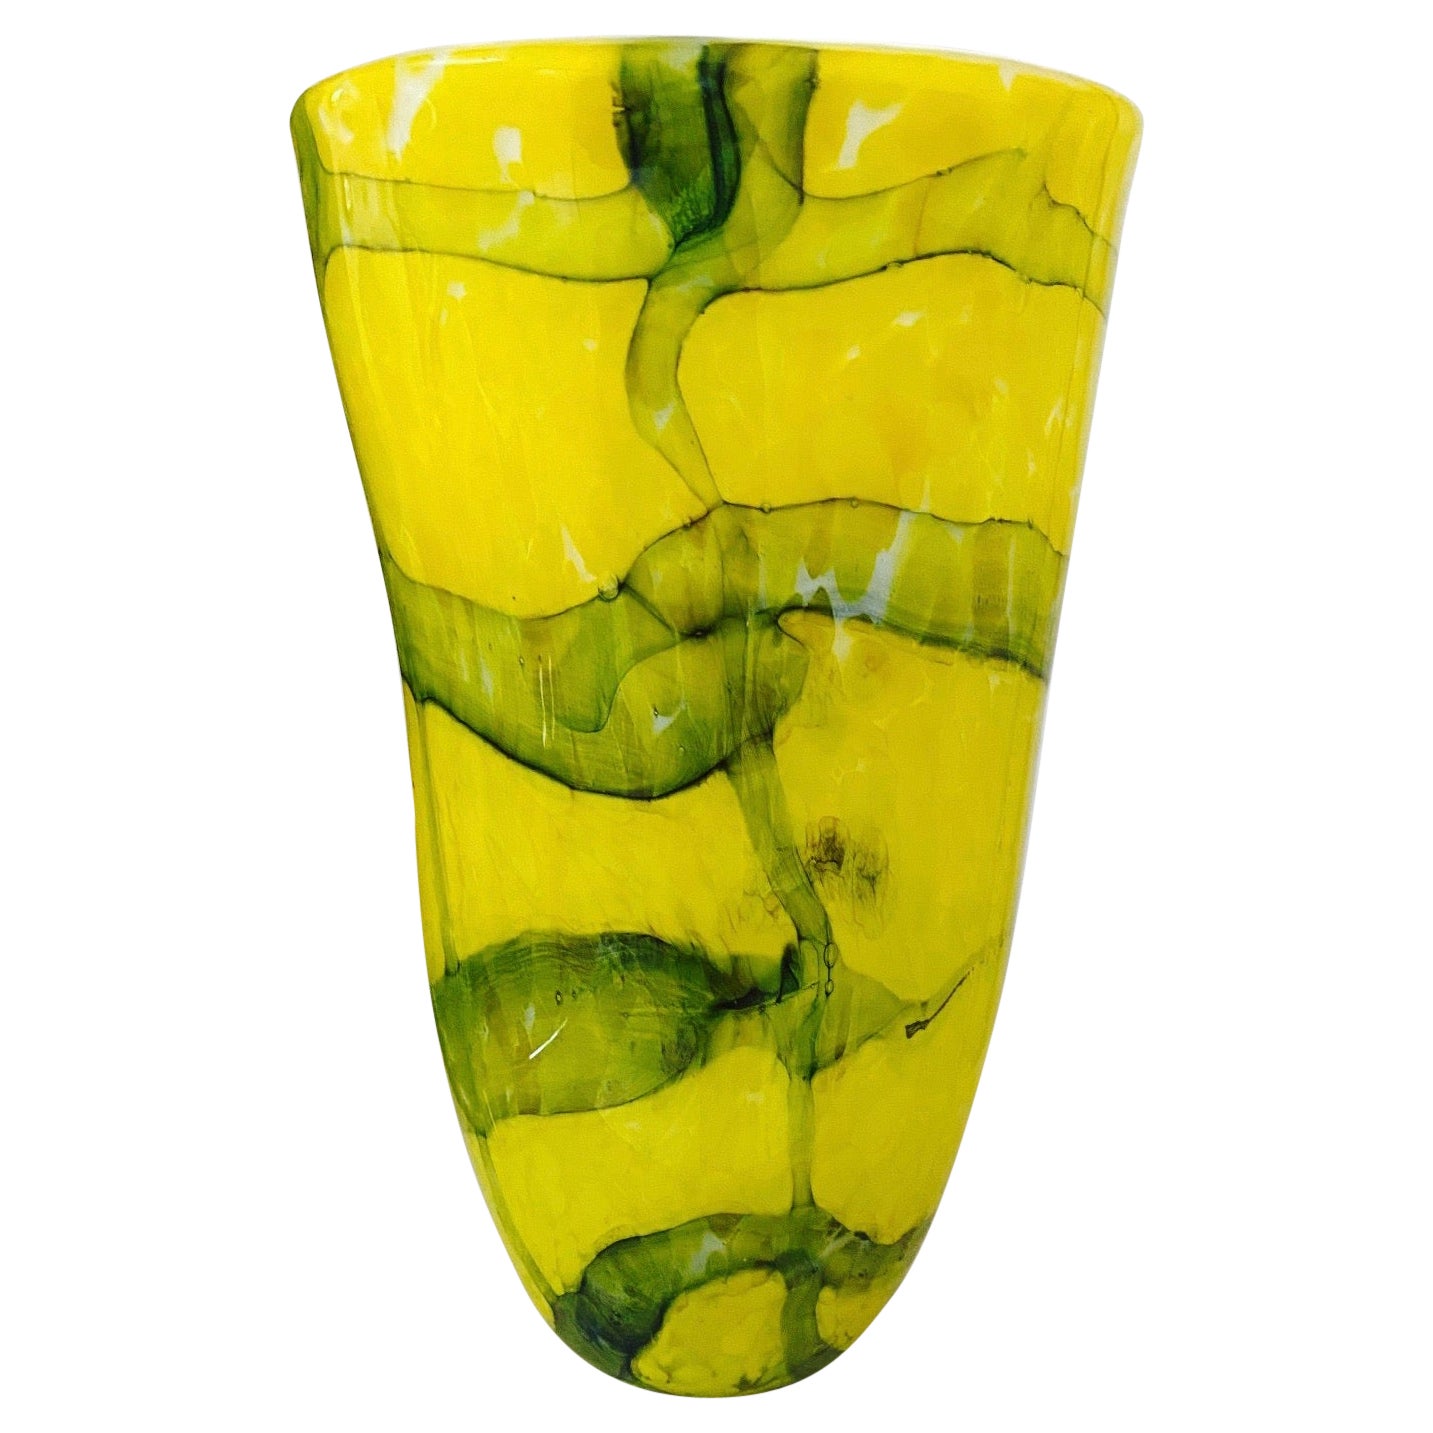 Abstract Murano Glass Vase by Fratelli Toso in Yellow and Green, c. 1980